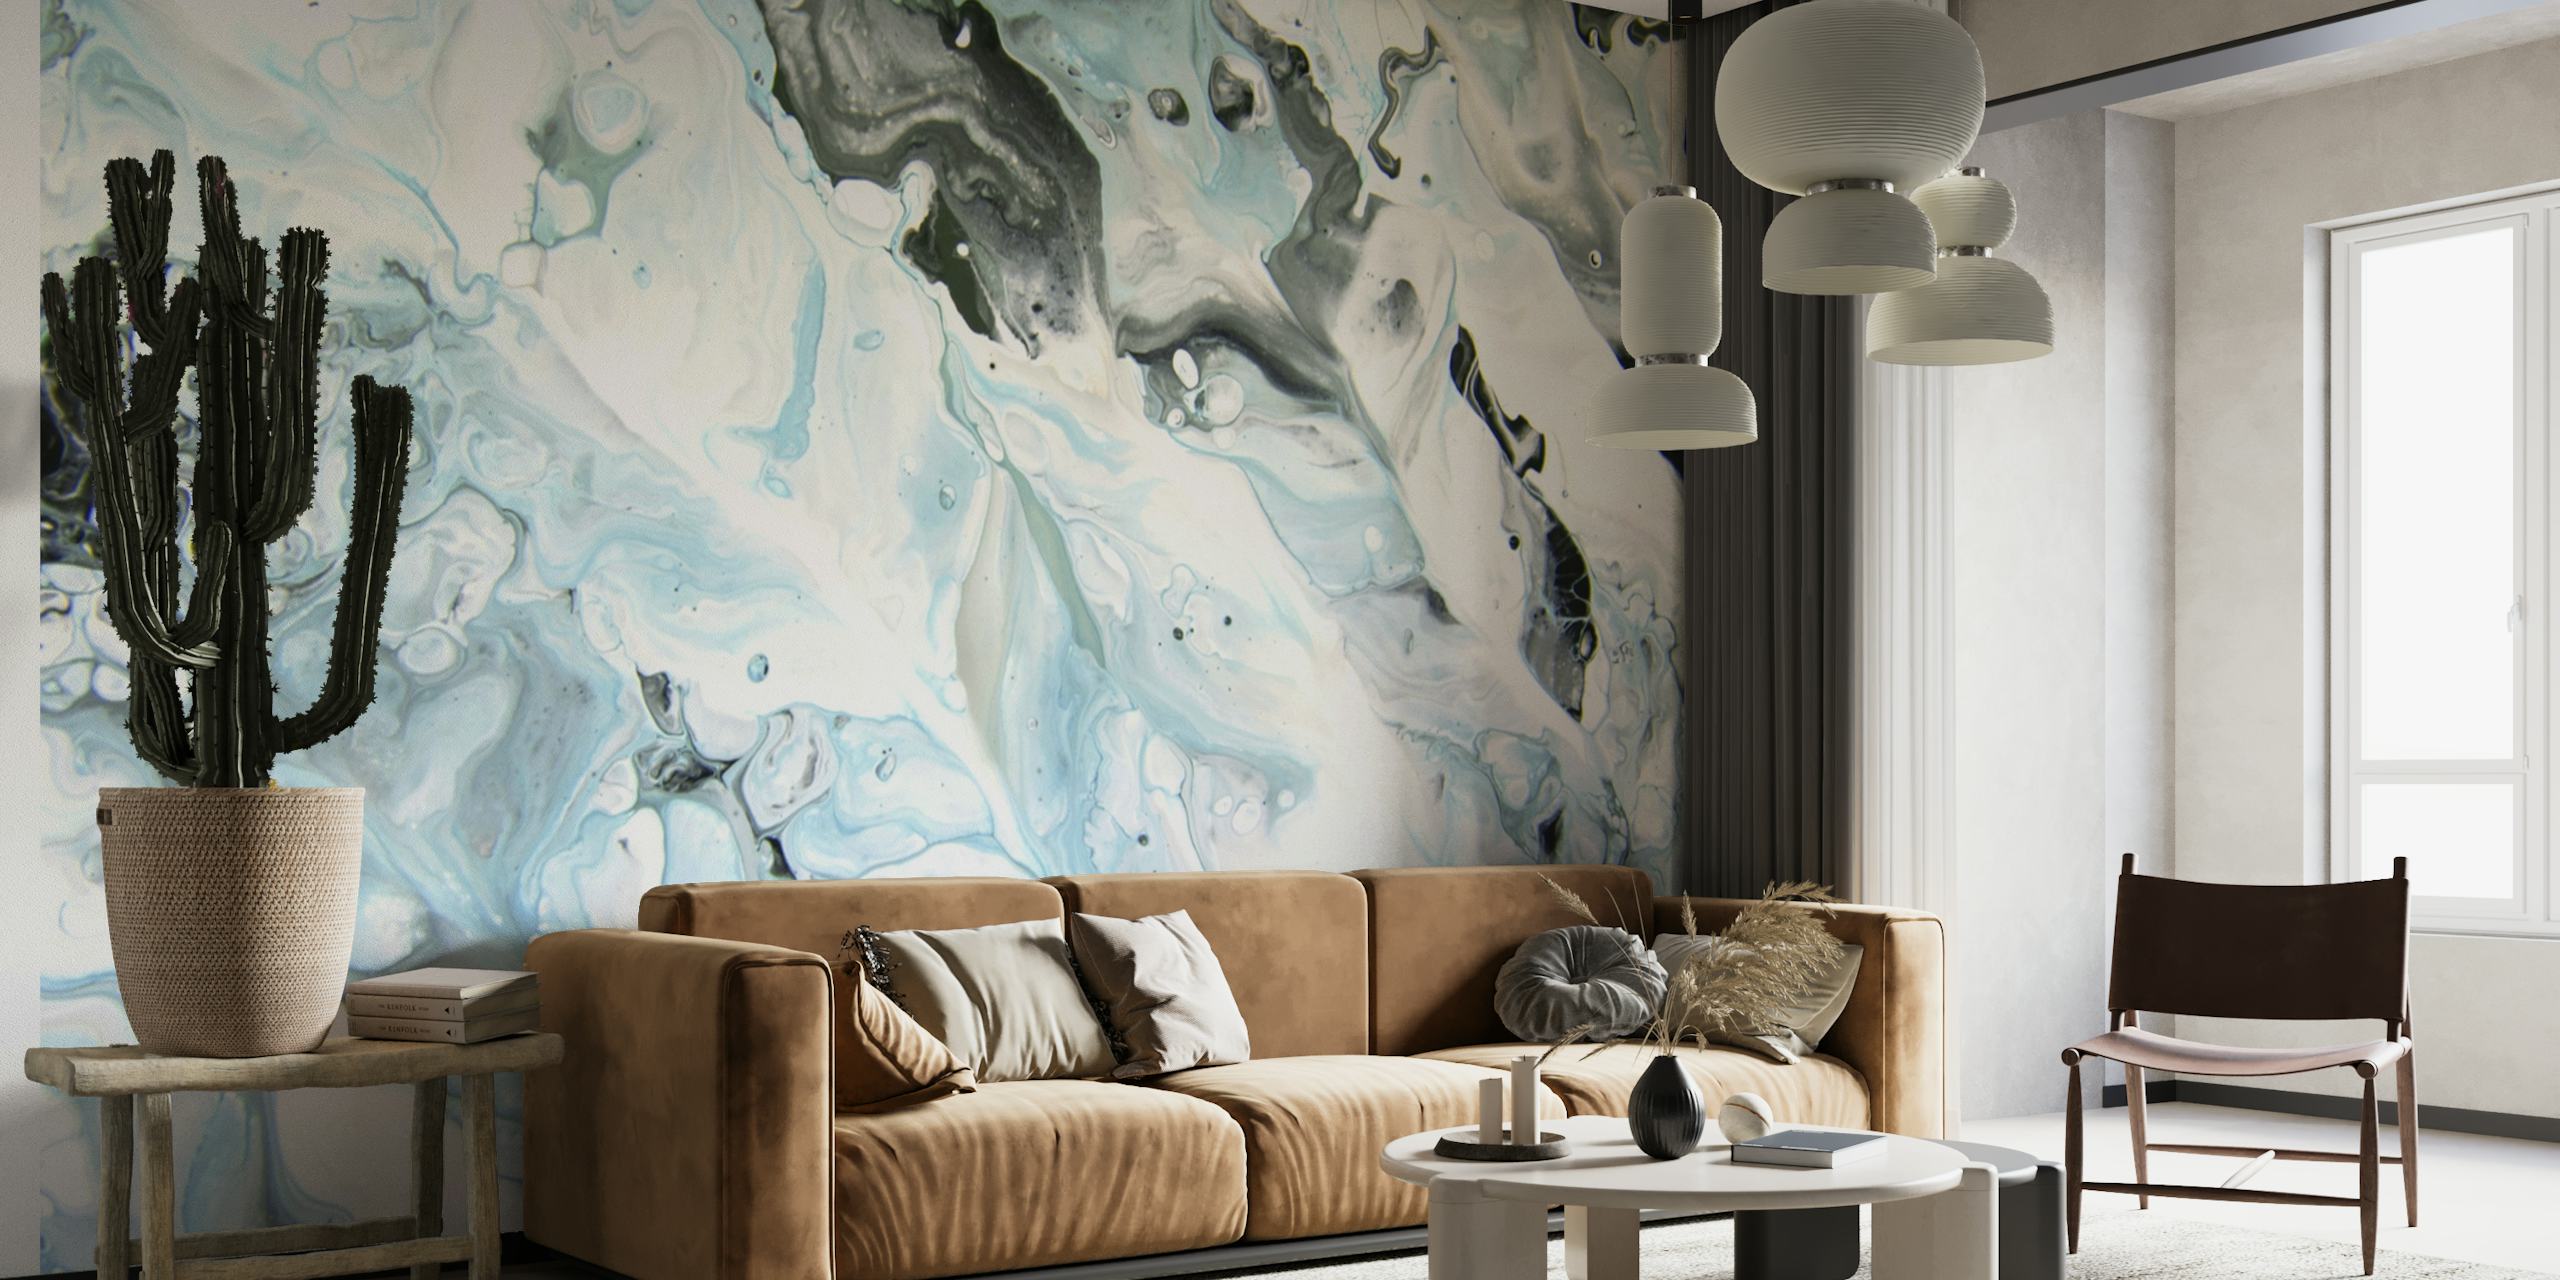 Abstract patterns of silvery greys and soft whites mimicking marble in a wall mural